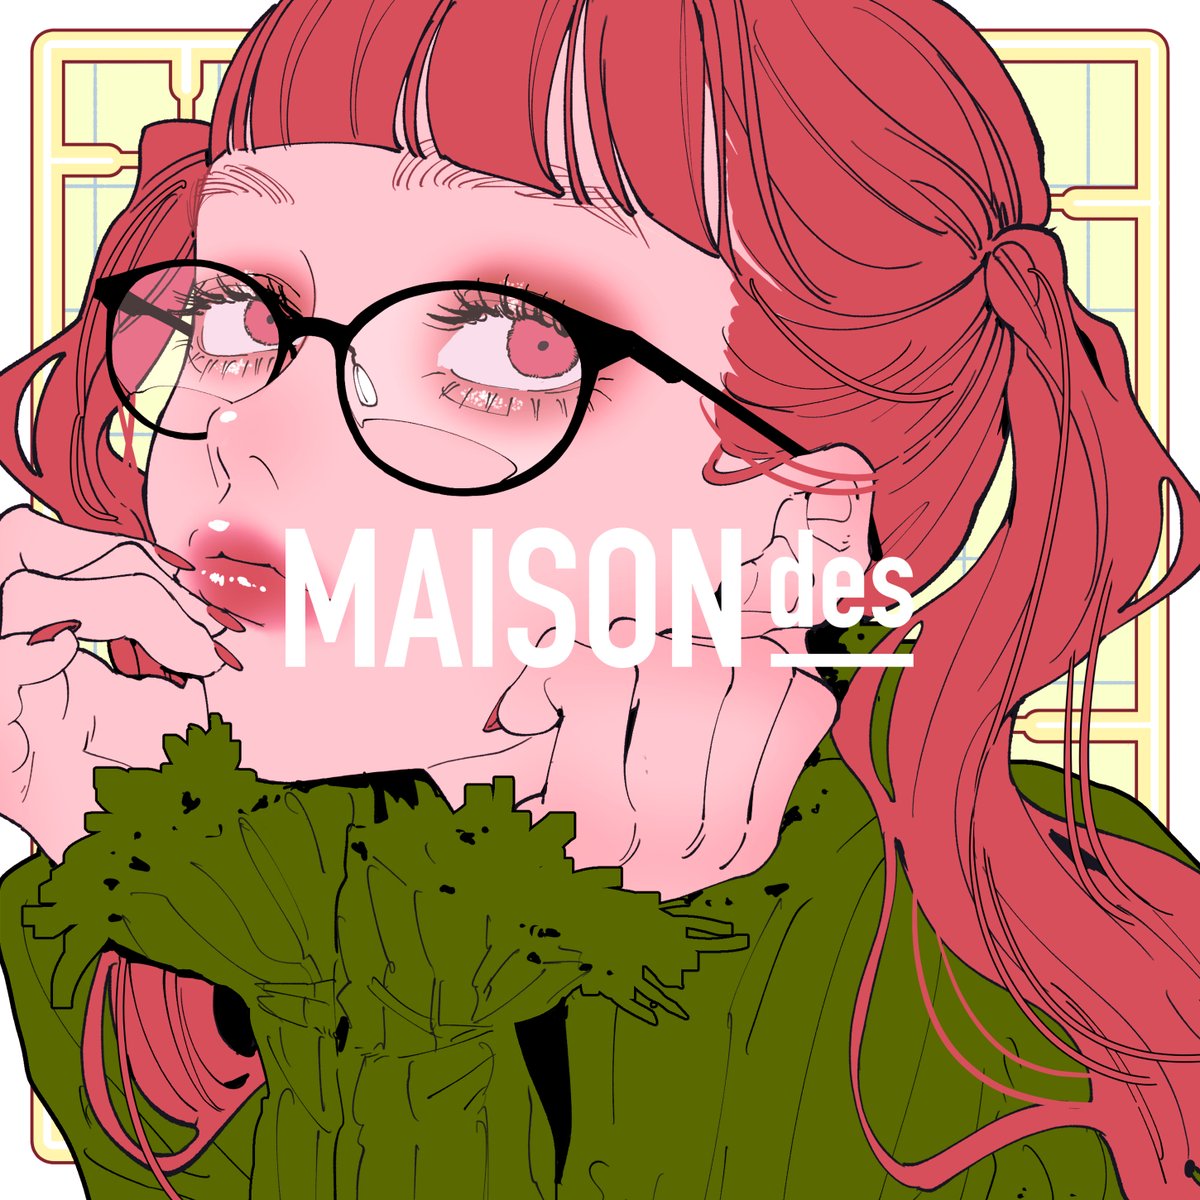 Cover art for『MAISONdes - いつのまに feat. Aimer, 和ぬか』from the release『I like you (feat. Aimer & WANUKA)